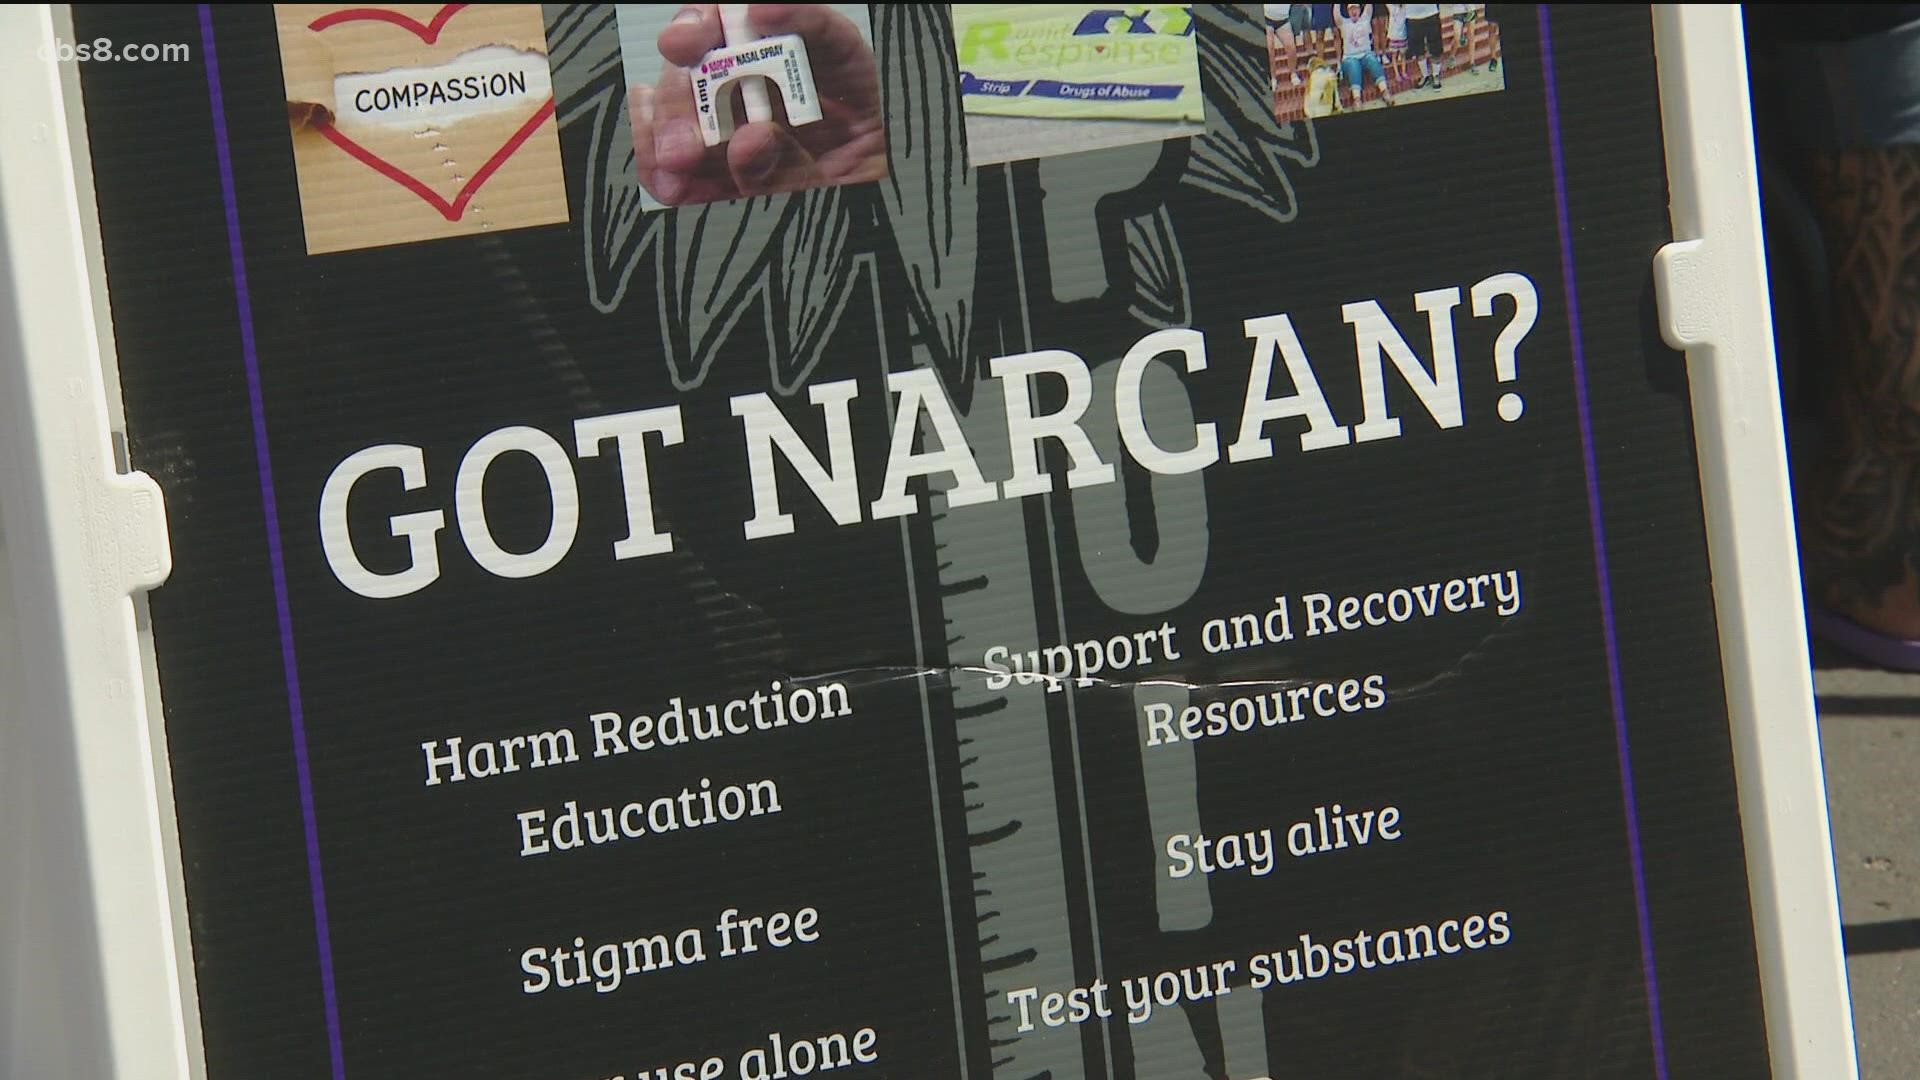 A Day of Action in National City, an event brought awareness on the ongoing increase in fentanyl related overdose deaths across San Diego.